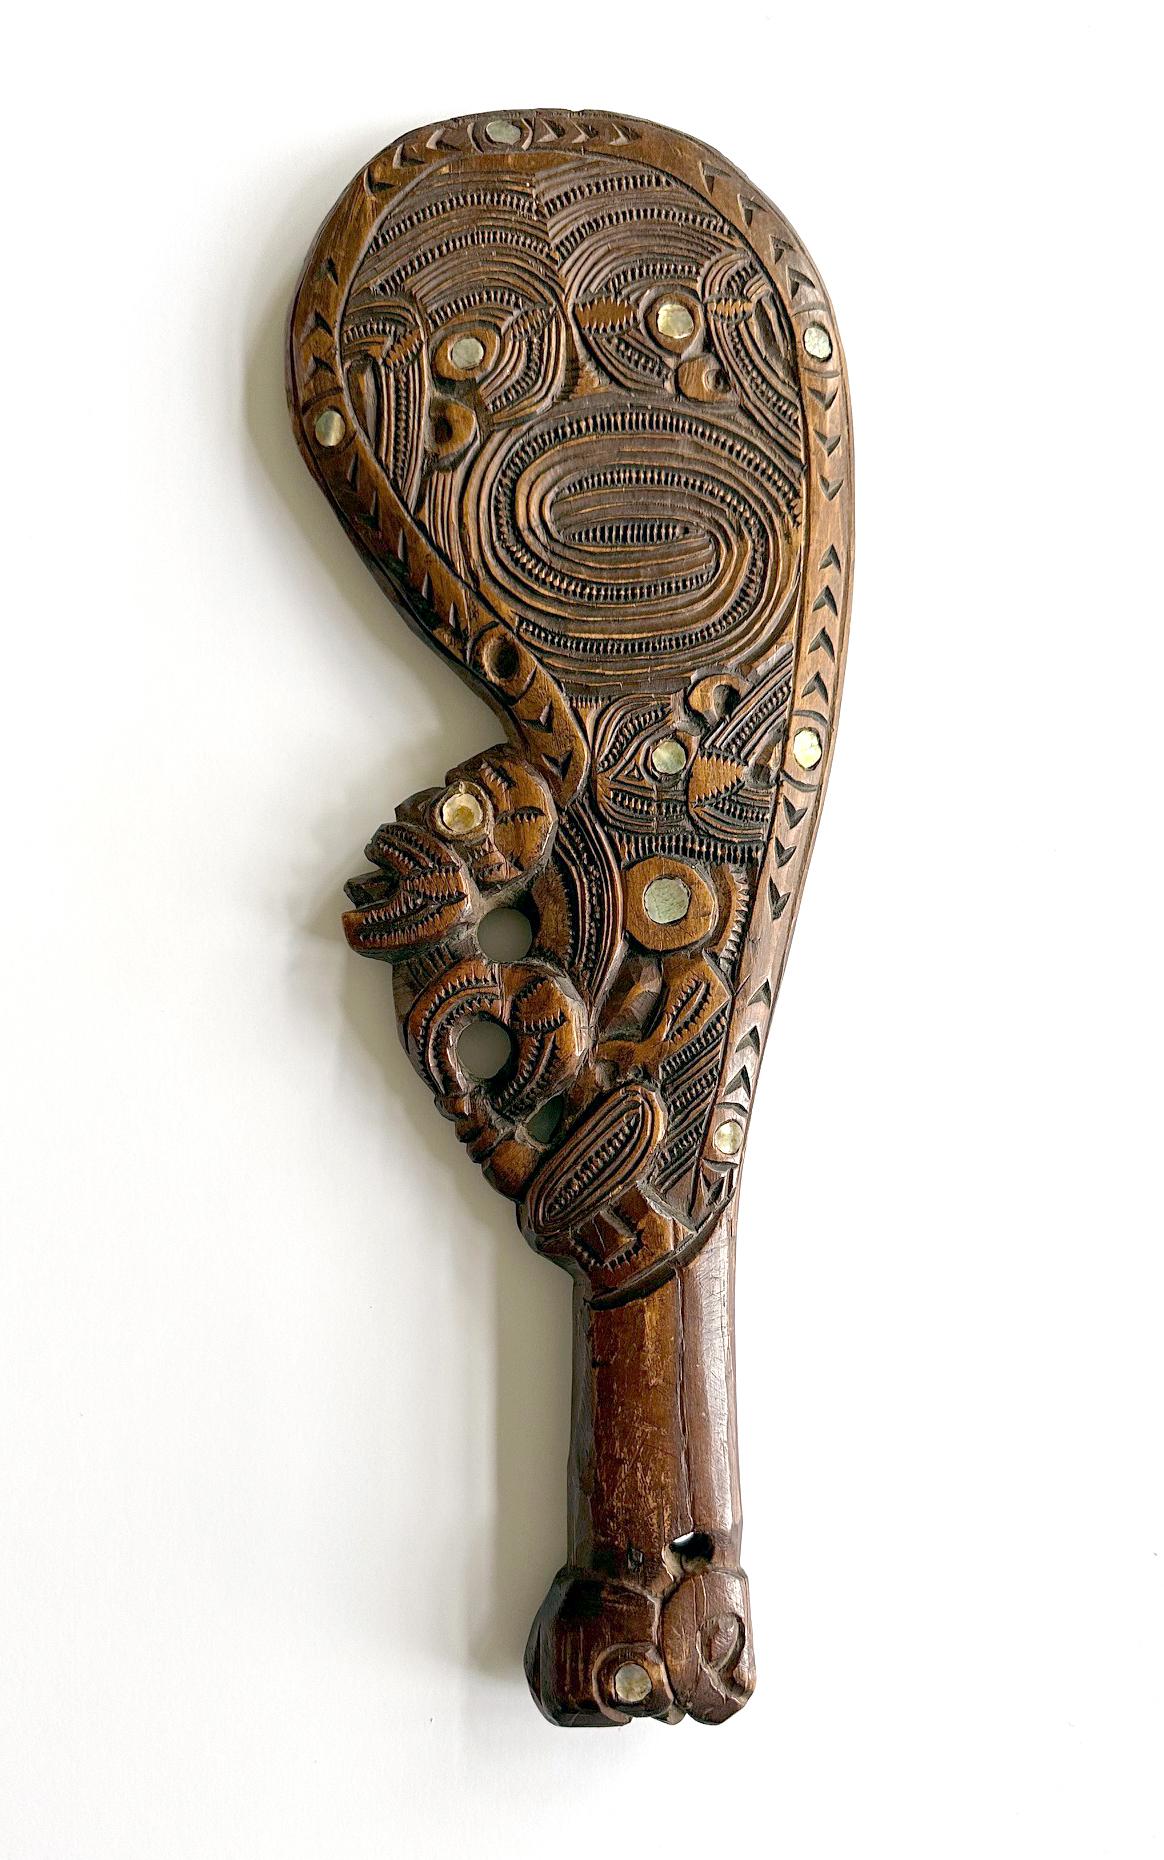 A wood club known as Wahaika intricately carved and inlayed with small round shells from New Zealand circa 1920s. The hand-hold club was traditionally used as a close-range combat weapon before the European contact by Māori people, indigenous